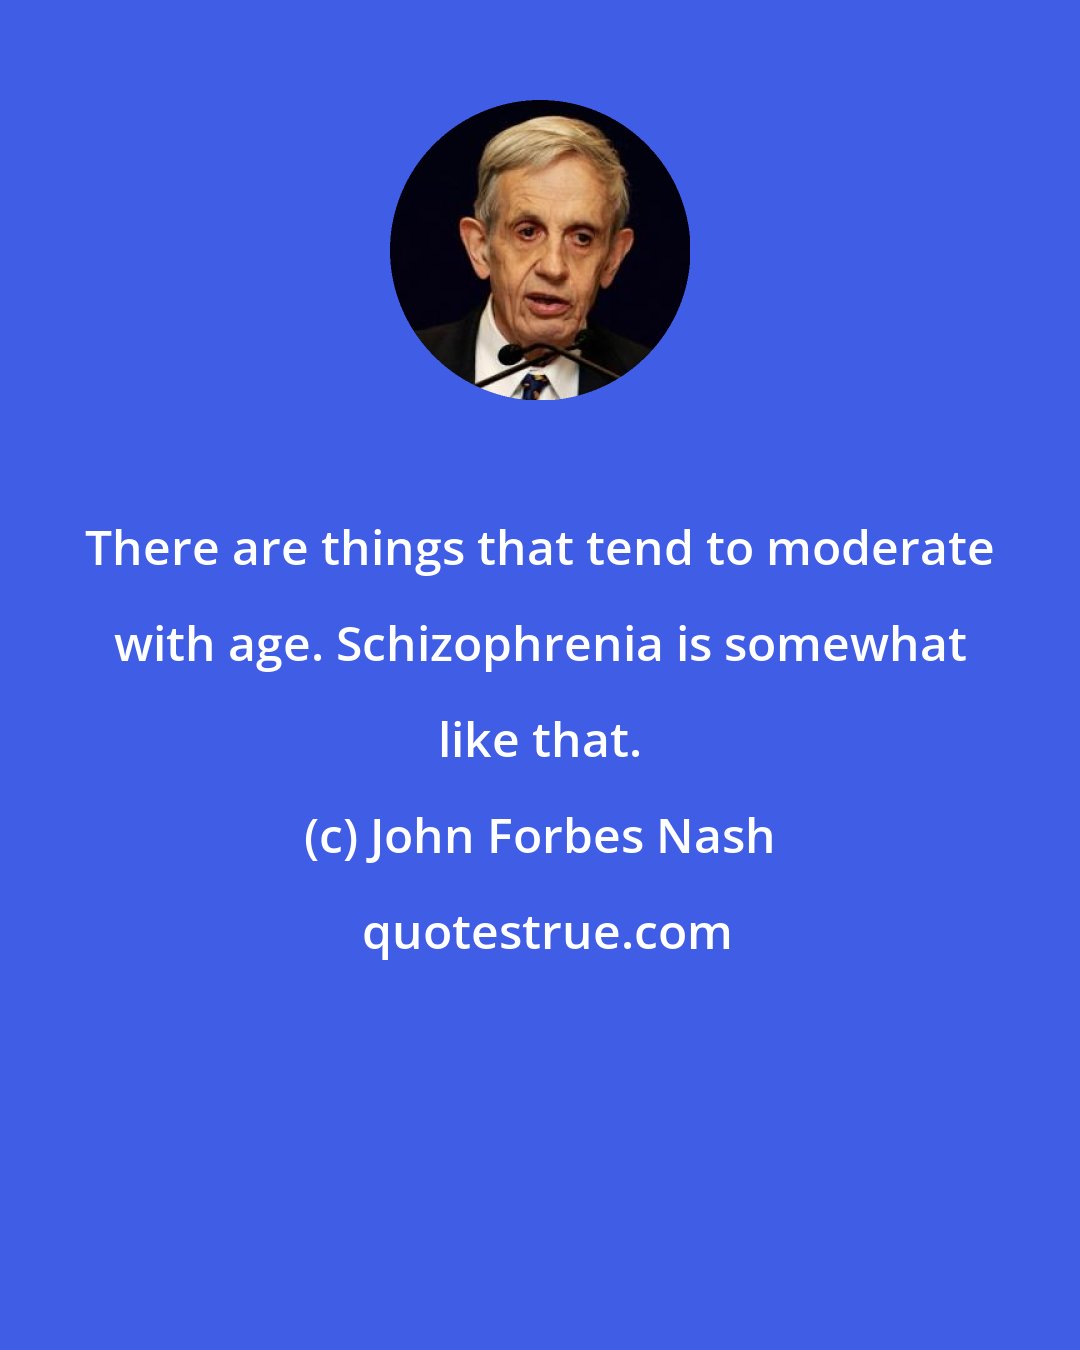 John Forbes Nash: There are things that tend to moderate with age. Schizophrenia is somewhat like that.